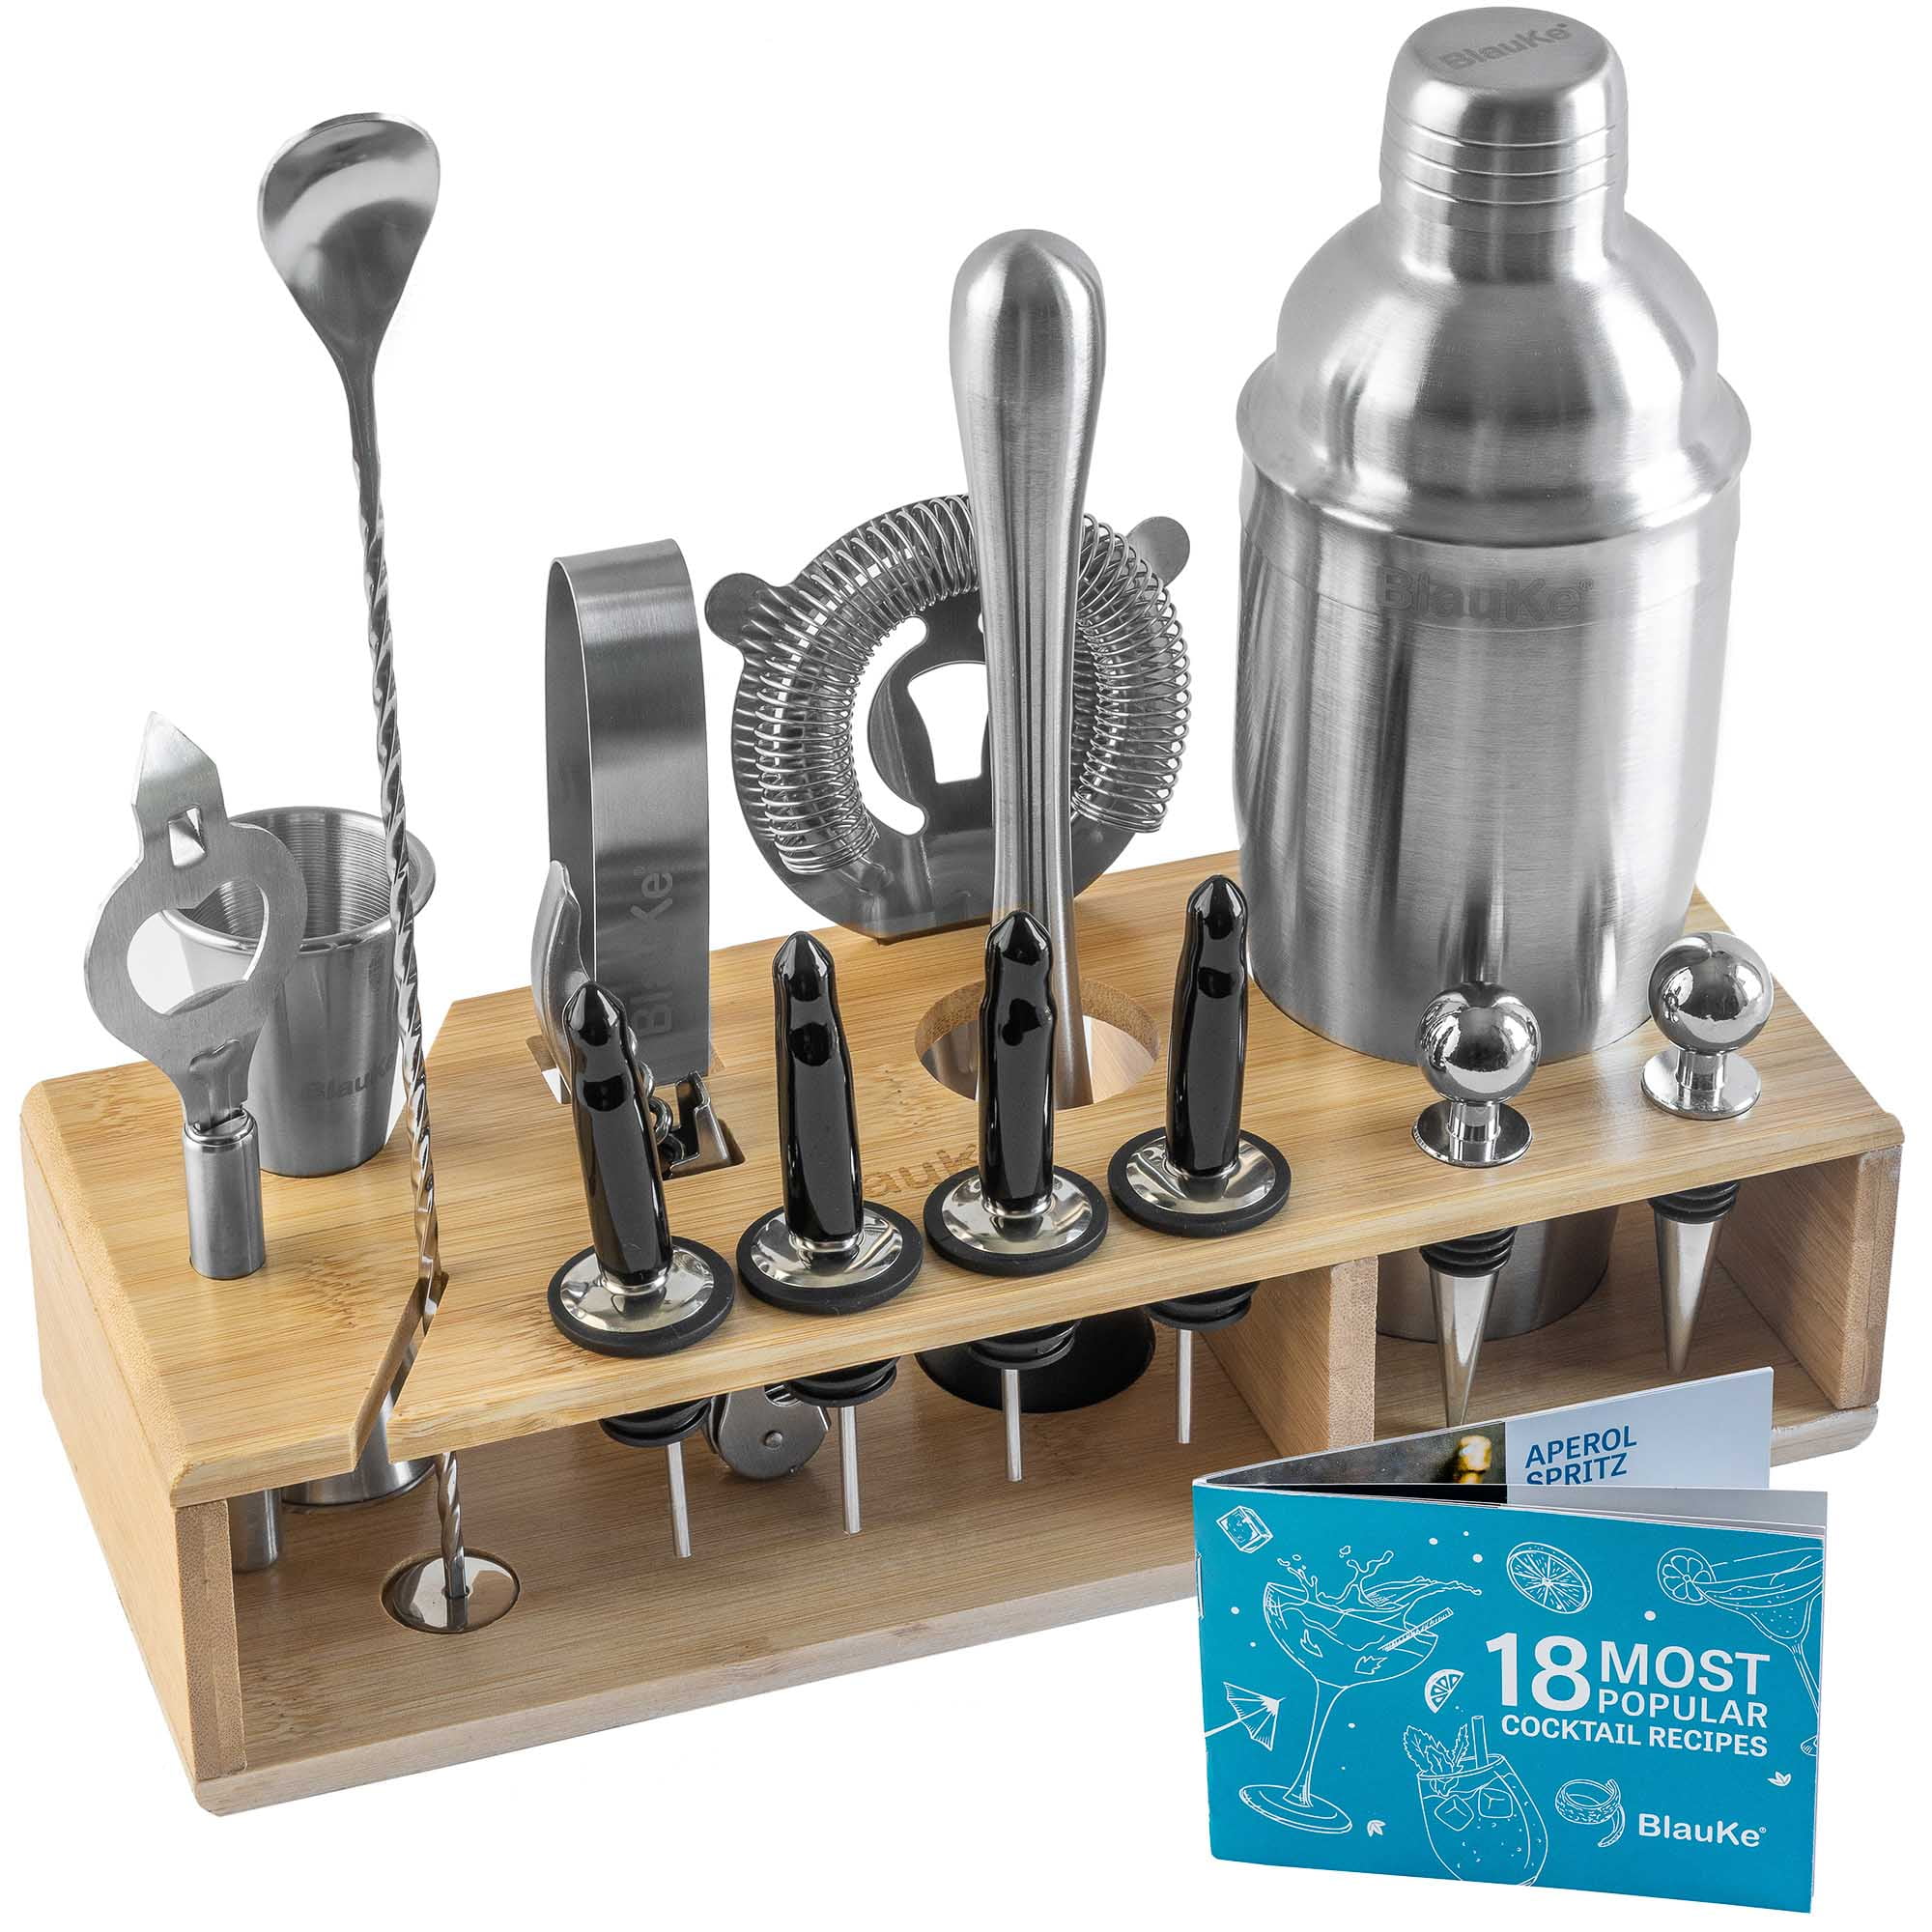 Martini Shaker Drink Shaker 25 OZ Stainless Steel Built-in Filter Bartender Kit With Measuring Jigger Cocktail Shaker Set 5 Piece Professional Bar Tools Mixing Spoon 2 Liquor Pourers 